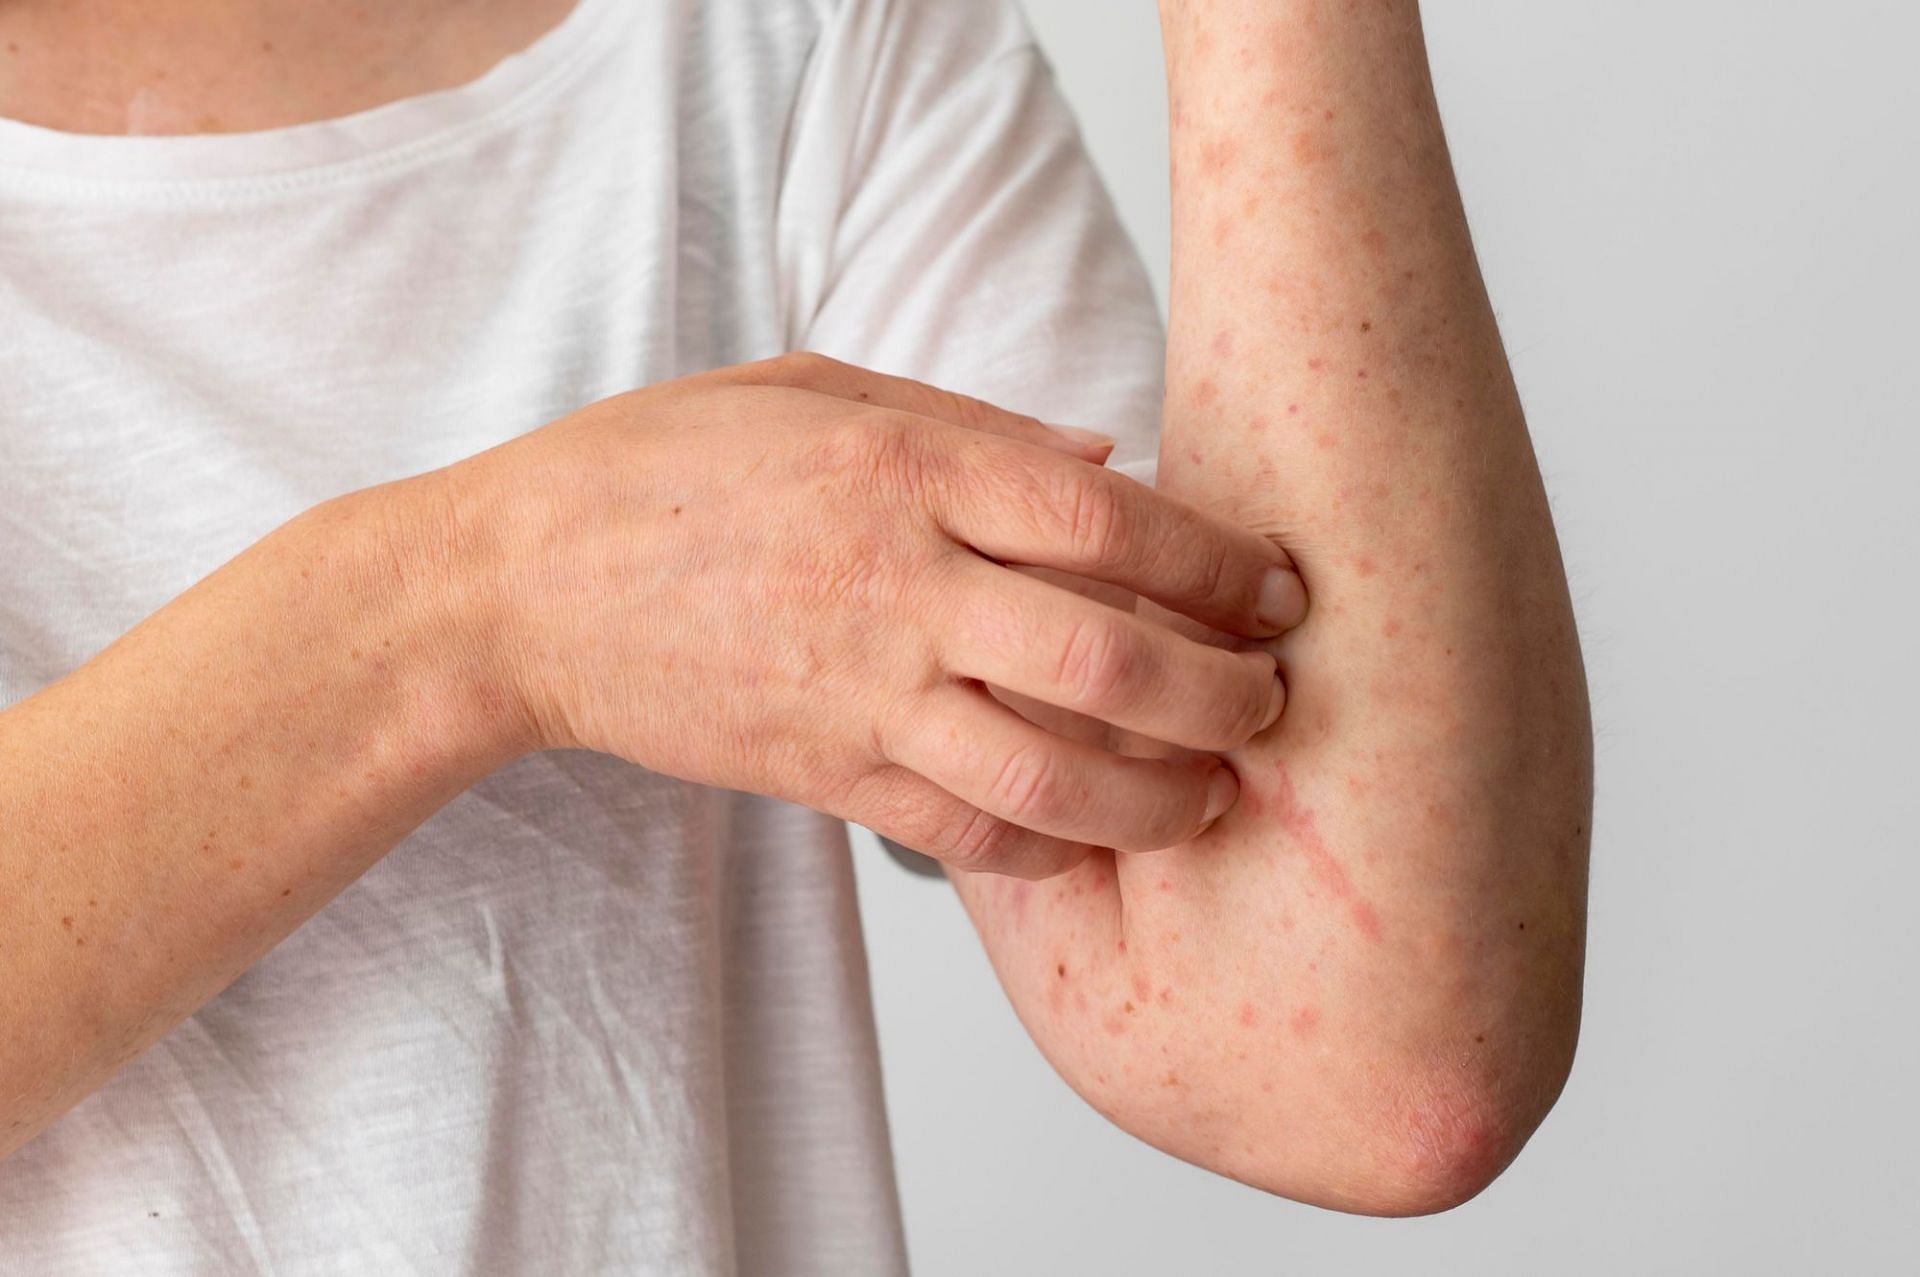 Chicken pox scars can be reduced by natural remedies. (Image via Freepik)